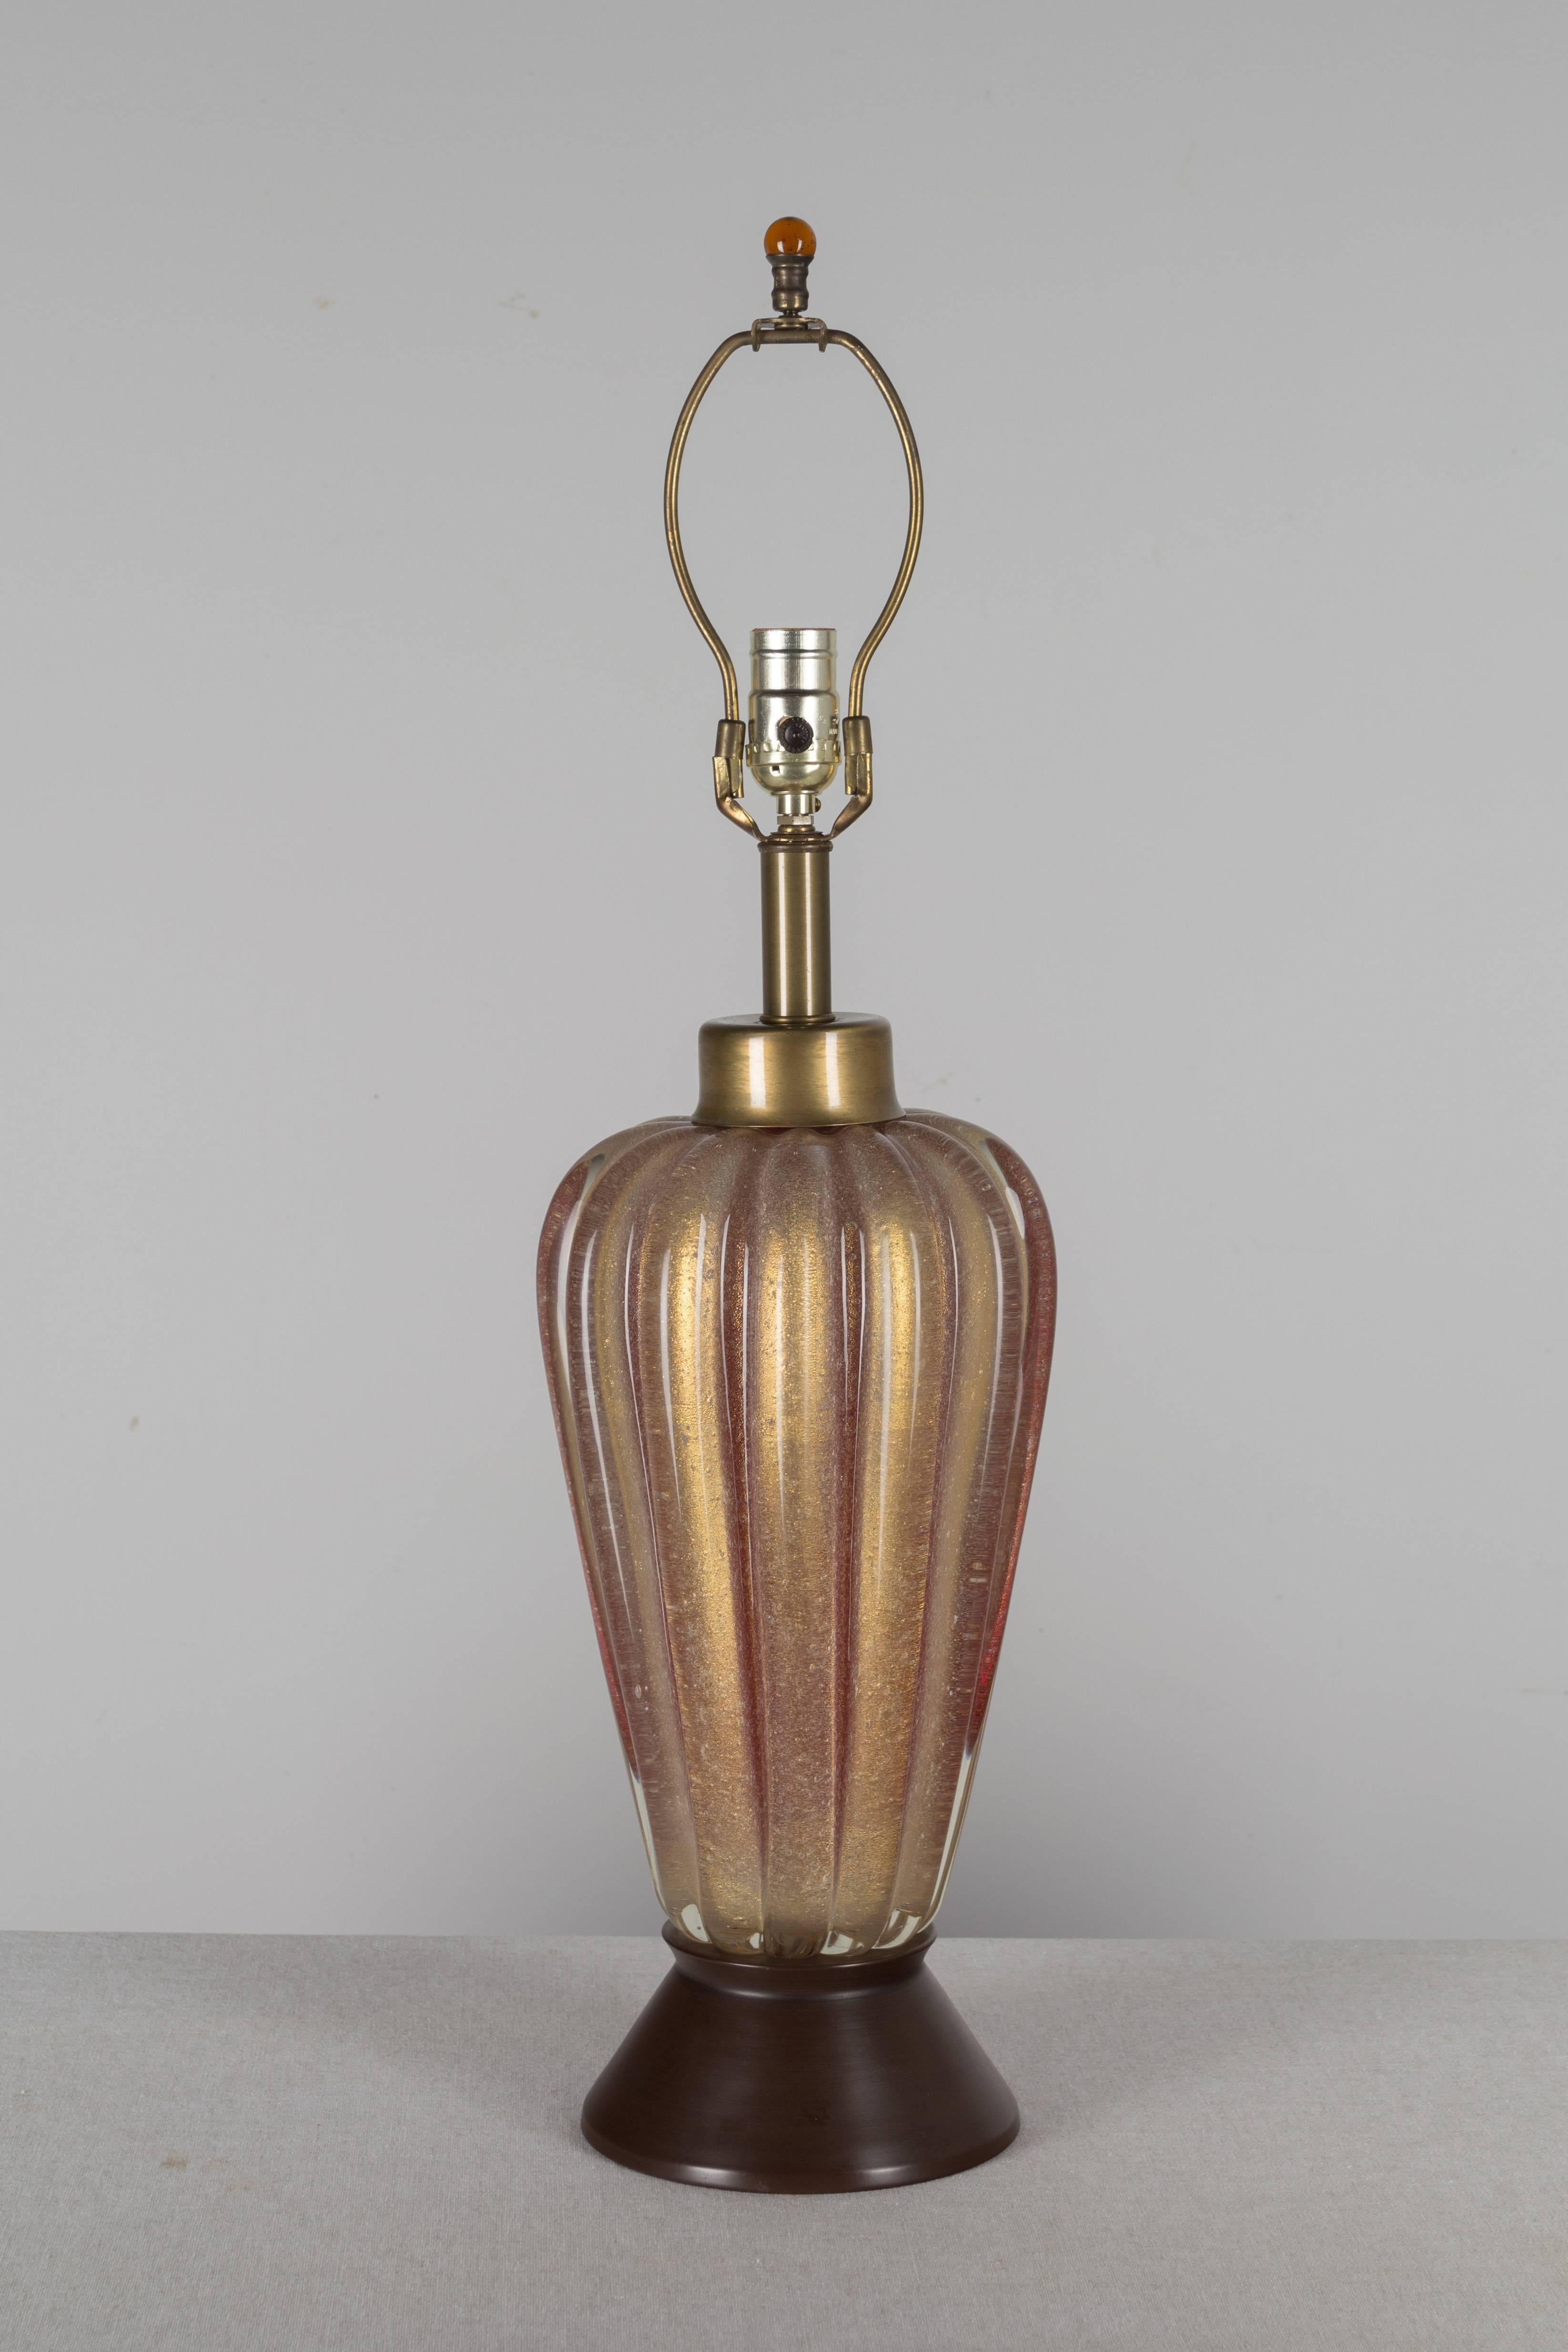 Murano lamp by Seguso, thick ribbed glass, handblown with infused bubbles. Red with heavy gold inclusions give the glass a warm amber color. Metal base. Rare, beautiful color. Silk shade is not included but measures 10.5